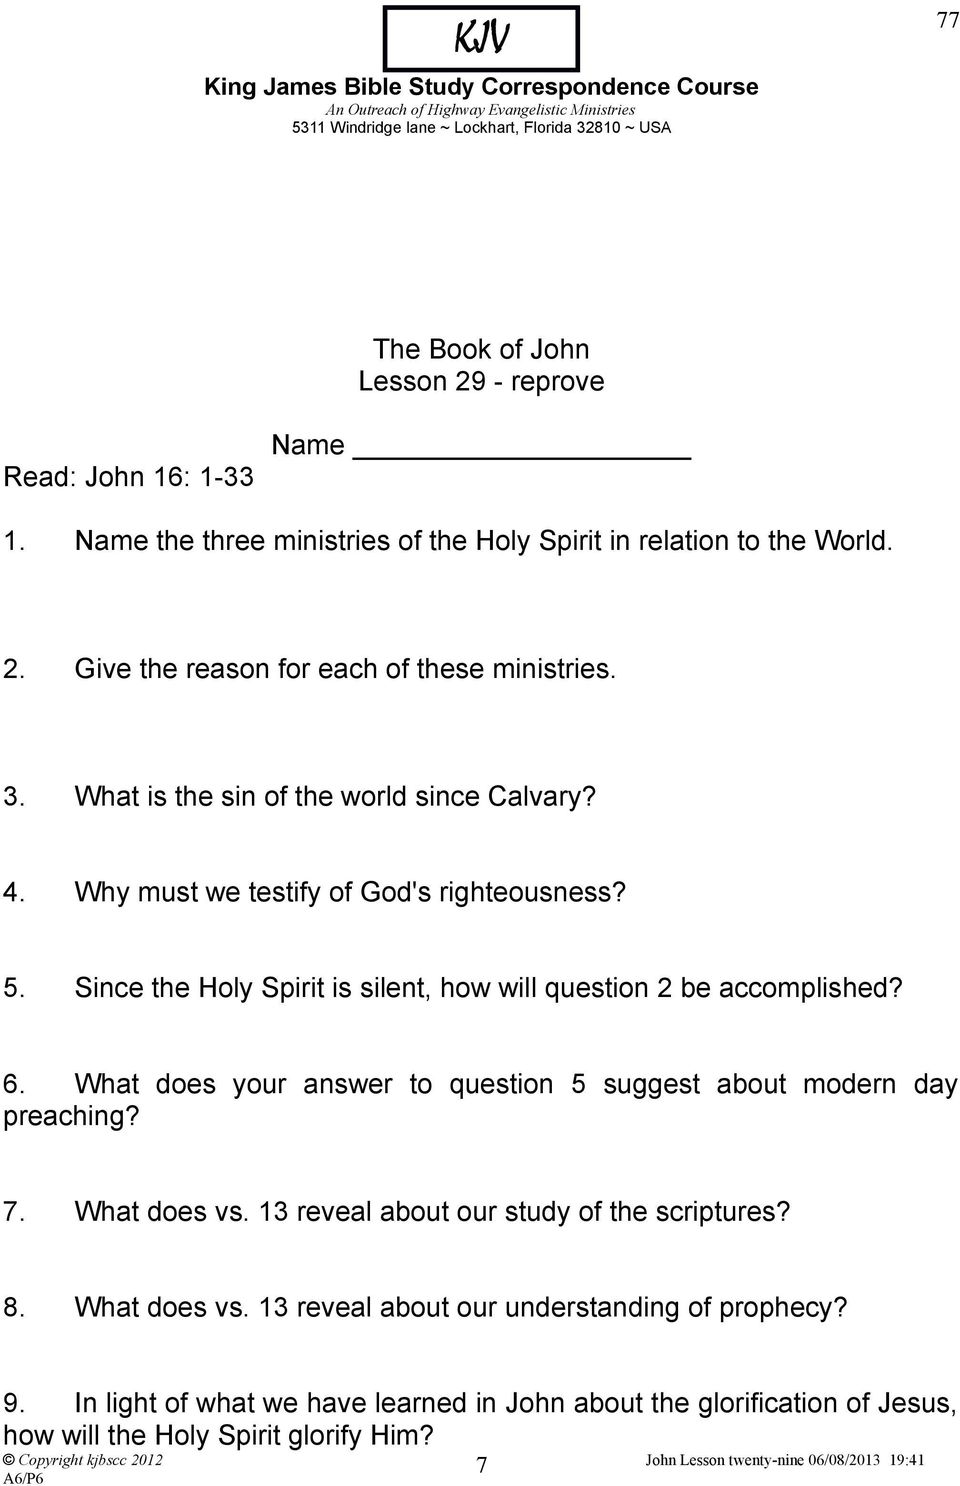 What does your answer to question 5 suggest about modern day preaching? 7. What does vs. 13 reveal about our study of the scriptures? 8. What does vs. 13 reveal about our understanding of prophecy?